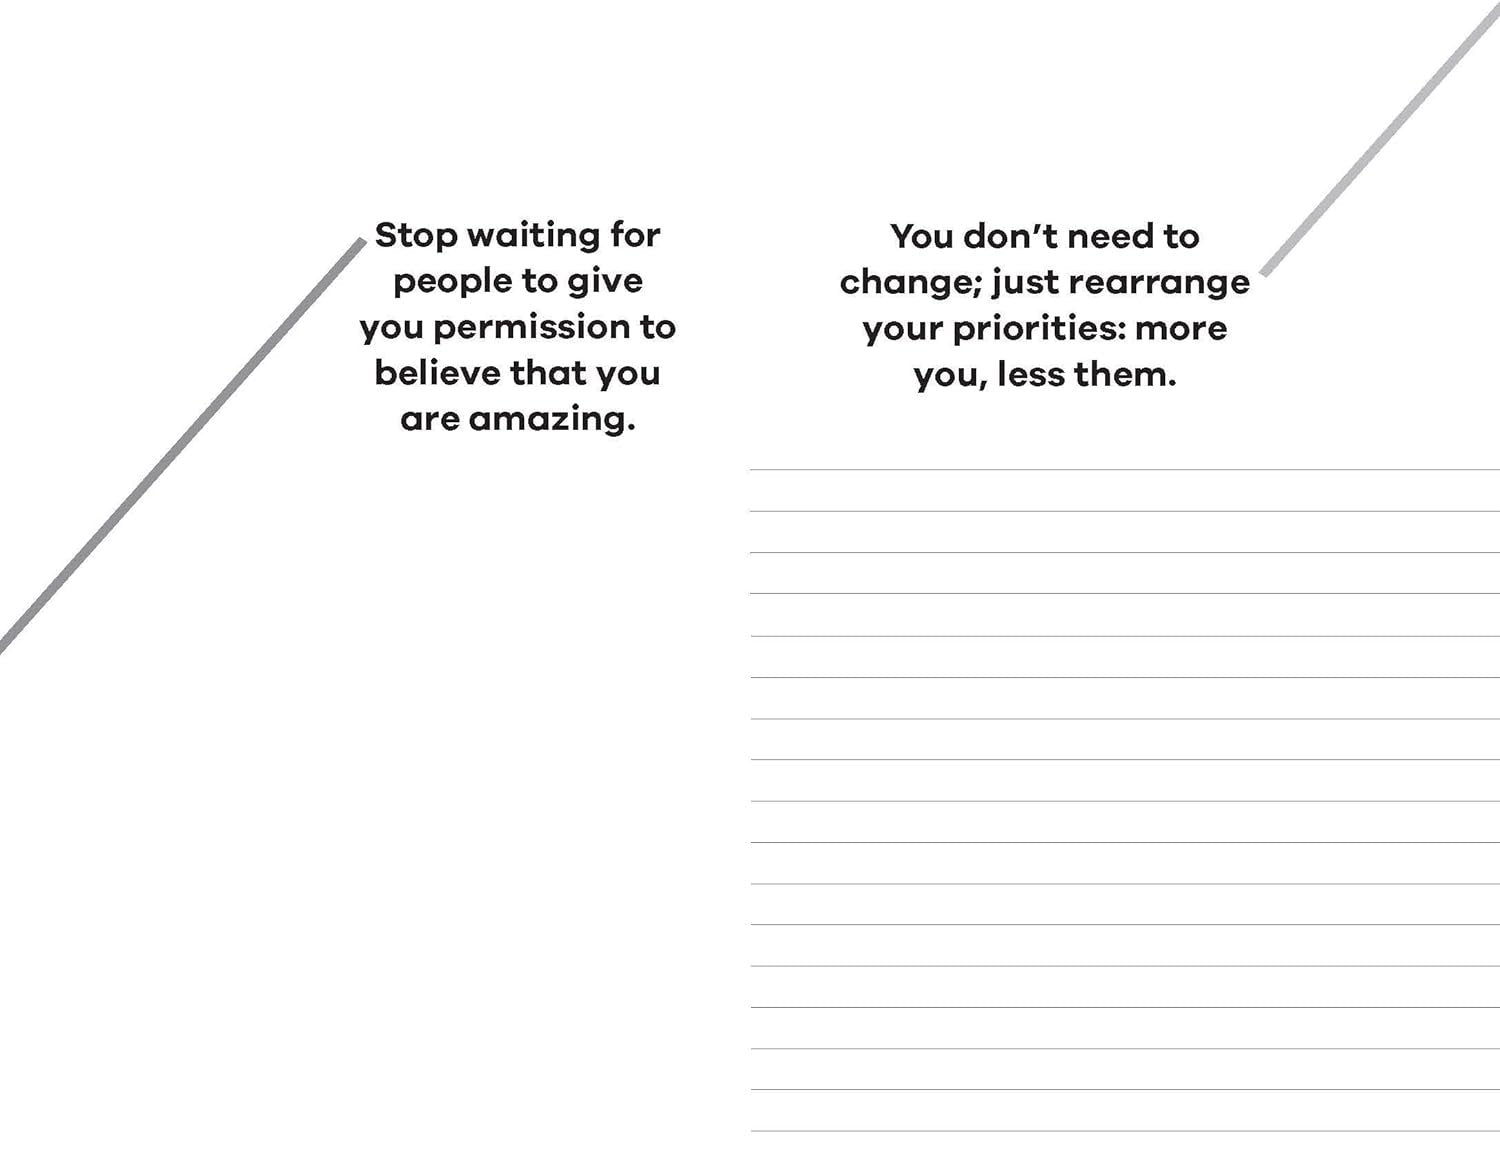 Image divided diagonally with text on each half; left side text says "stop waiting for people to give you permission to believe that you are amazing." right side says "your priorities need to change;
Product Name: What a Time to Journal: Work Out Why You Are Already Enough
Brand Name: by Chidera Eggerue (Author)